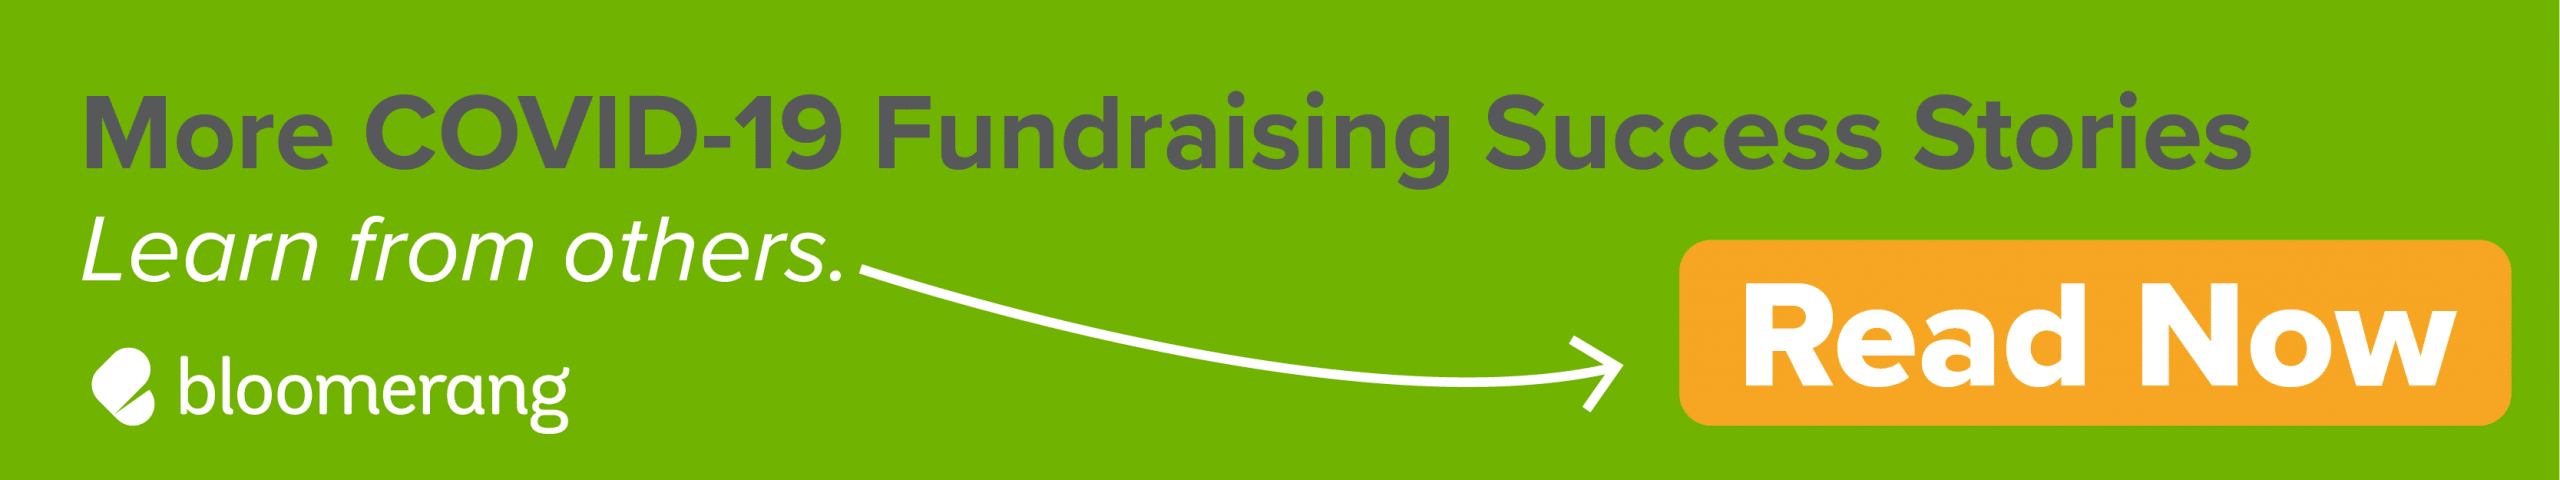 Click here to access additional COVID-19 fundraising success stories and resources.